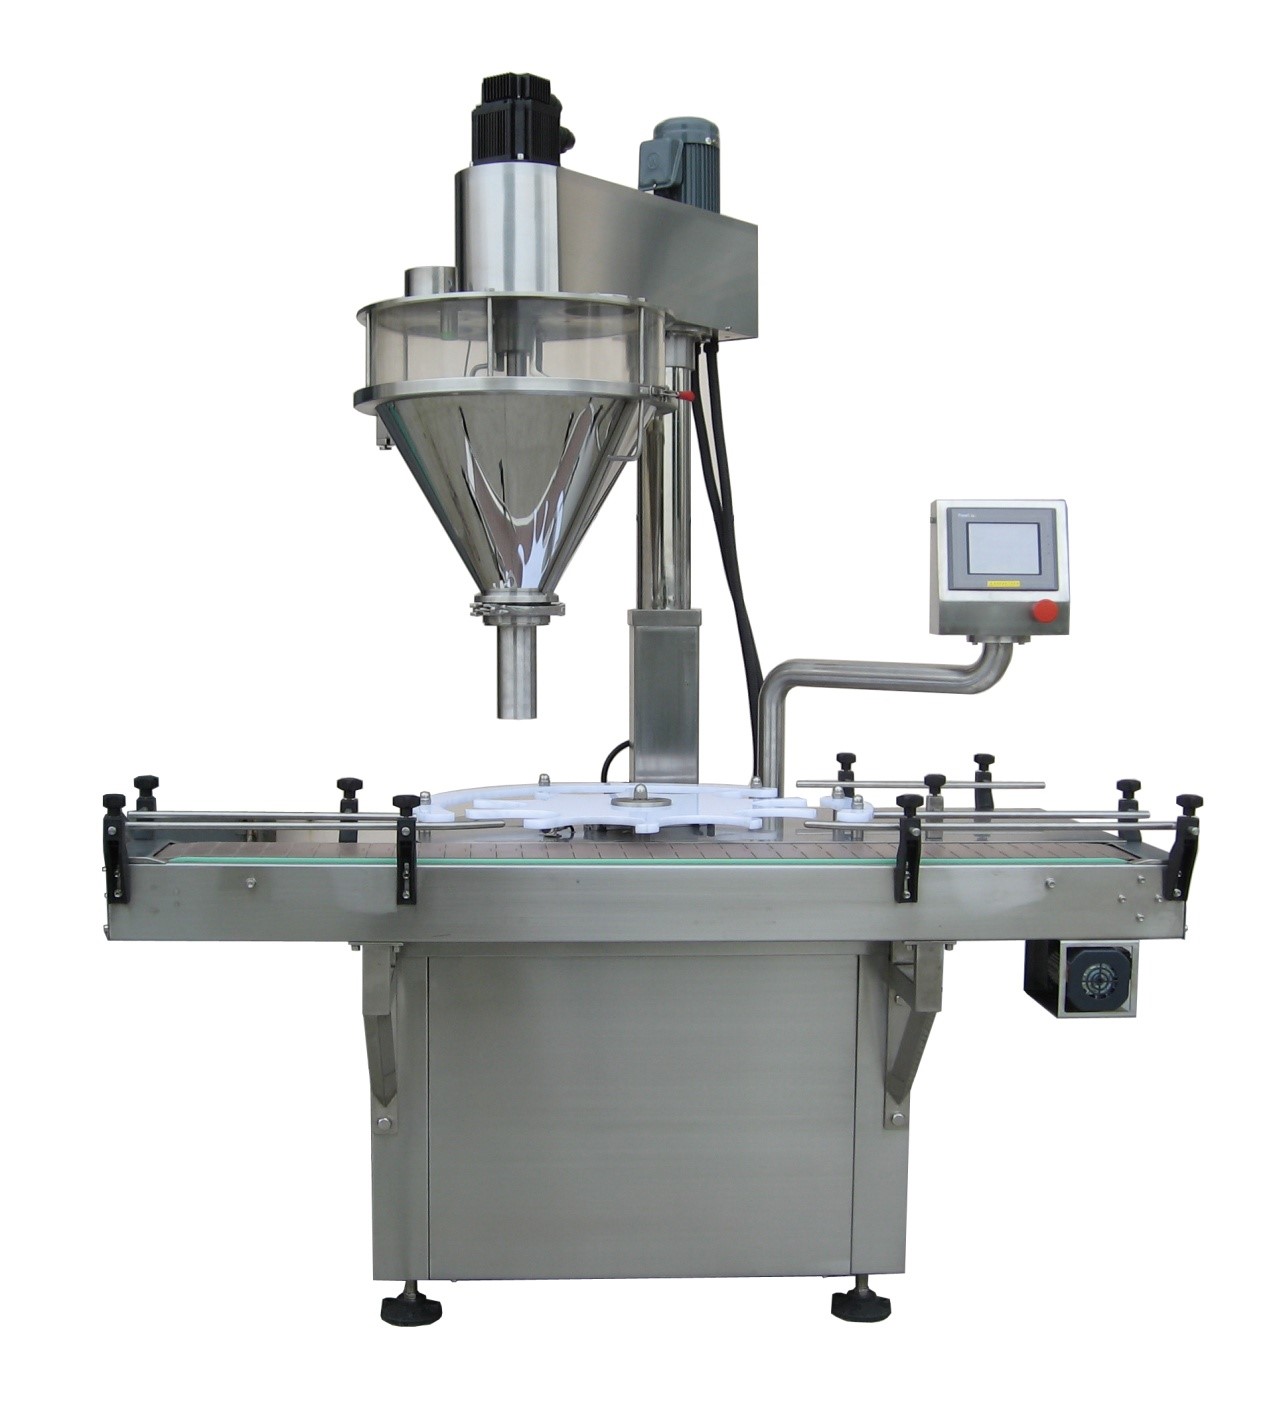 Single Head Rotary Automatic Auger Filler Featured Image